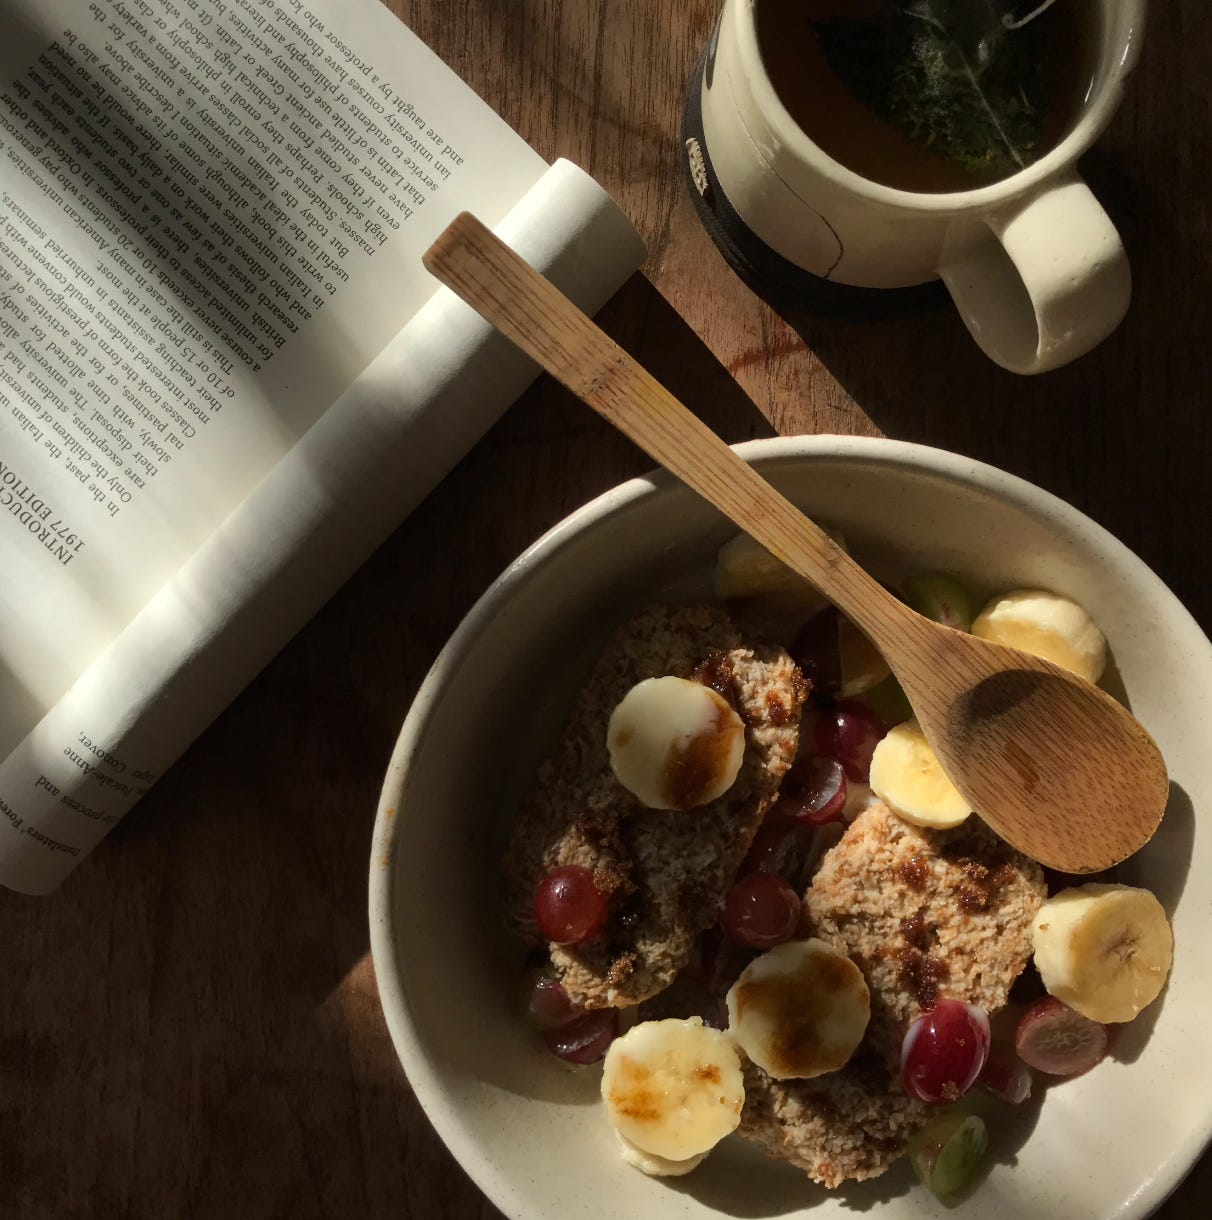 A photo in bright morning light, taken from above. A bowl of malty oat bars in the bottom right, with sliced rounds of banana, red grapes, and a bamboo wood spoon placed over. Above a full mug of mint tea. To the top left, cut off by the frame, is book rolled open to a central page, the text upside down and illegible. 